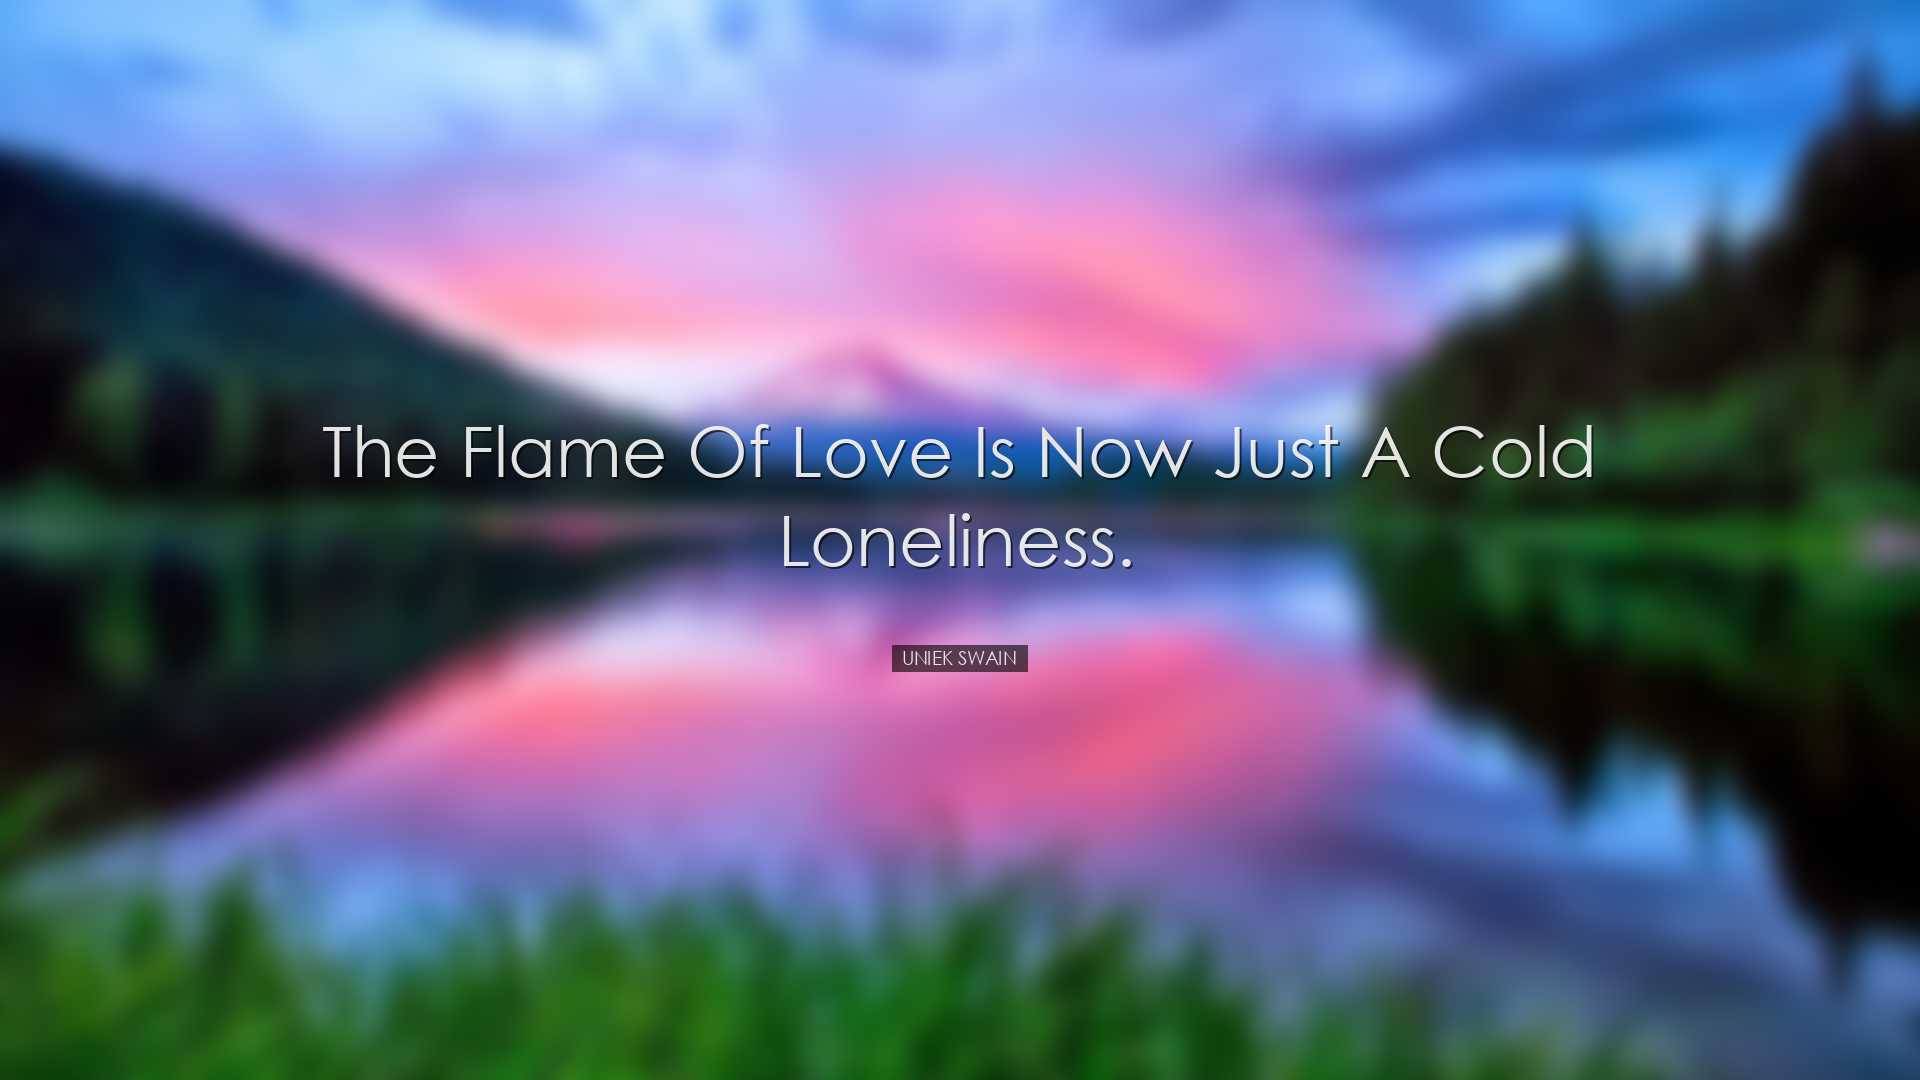 The flame of love is now just a cold loneliness. - Uniek Swain